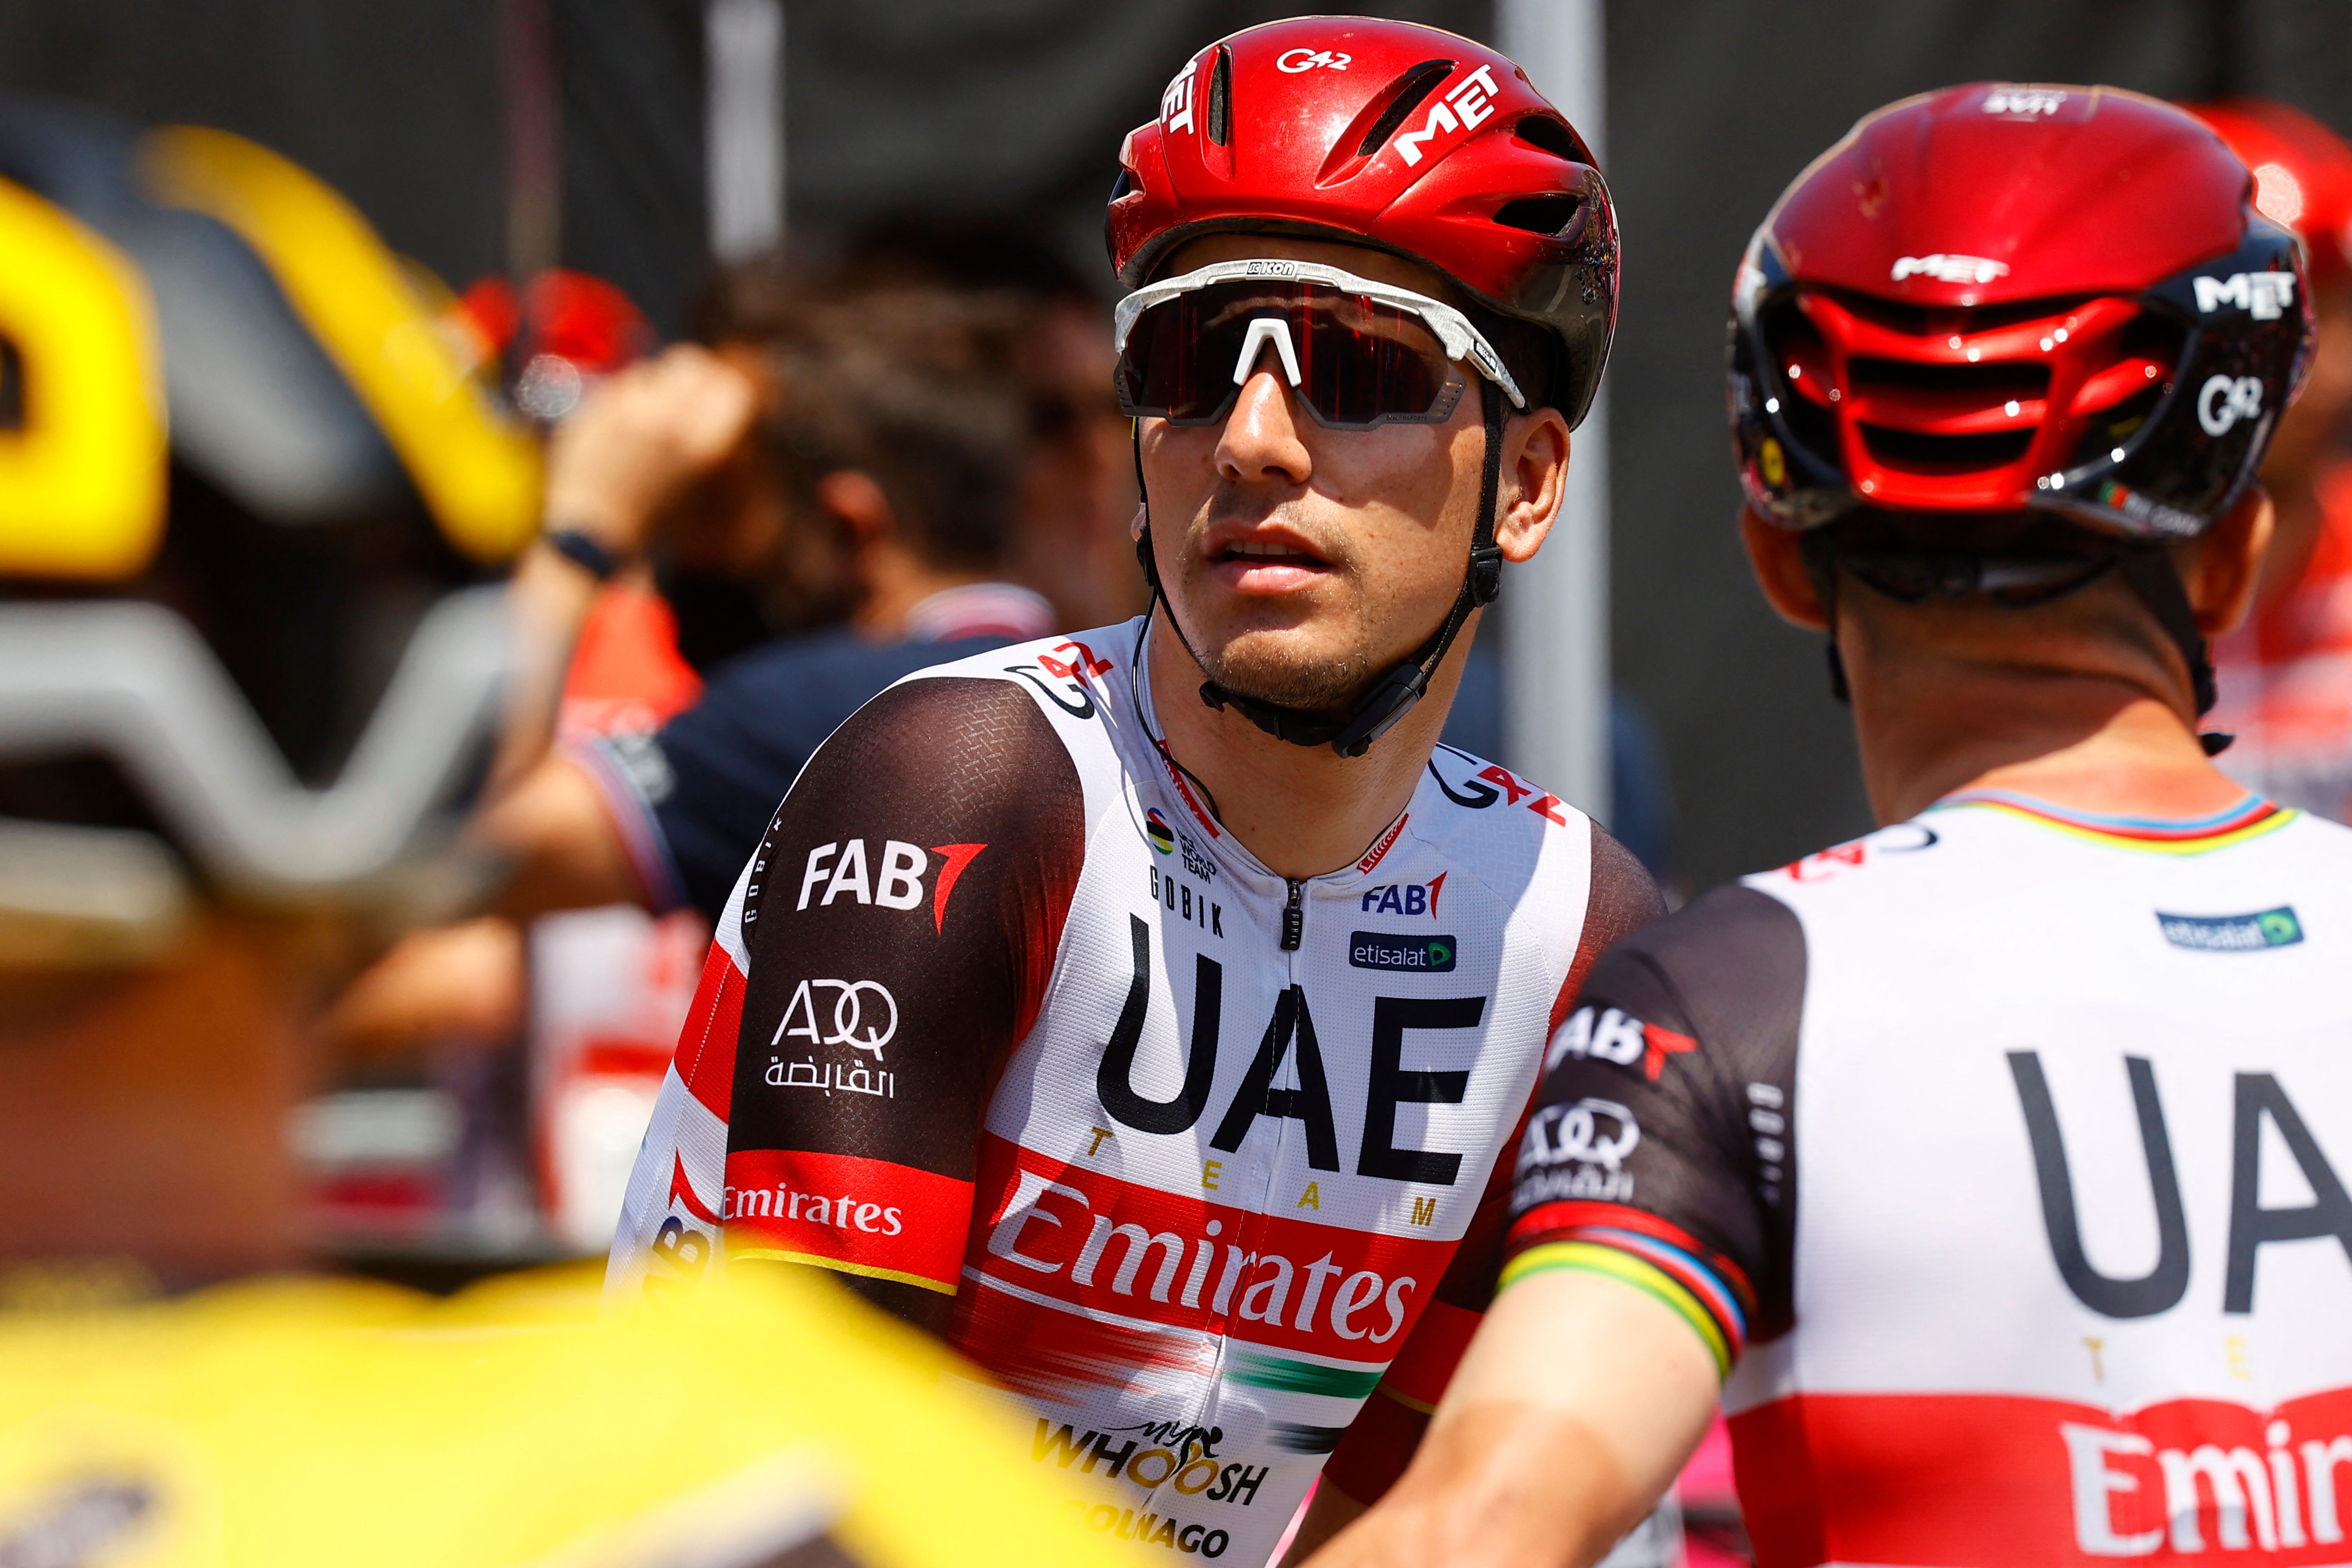 Team UAE Emirates Portuguese rider Joao Almeida prepare to take the start of the 6th stage of the Giro dItalia 2022 cycling race 192 kilometers between Palmi and Scalea Calabria on May 12 2022 Photo by Luca Bettini AFP Photo by LUCA BETTINIAFP via Getty Images